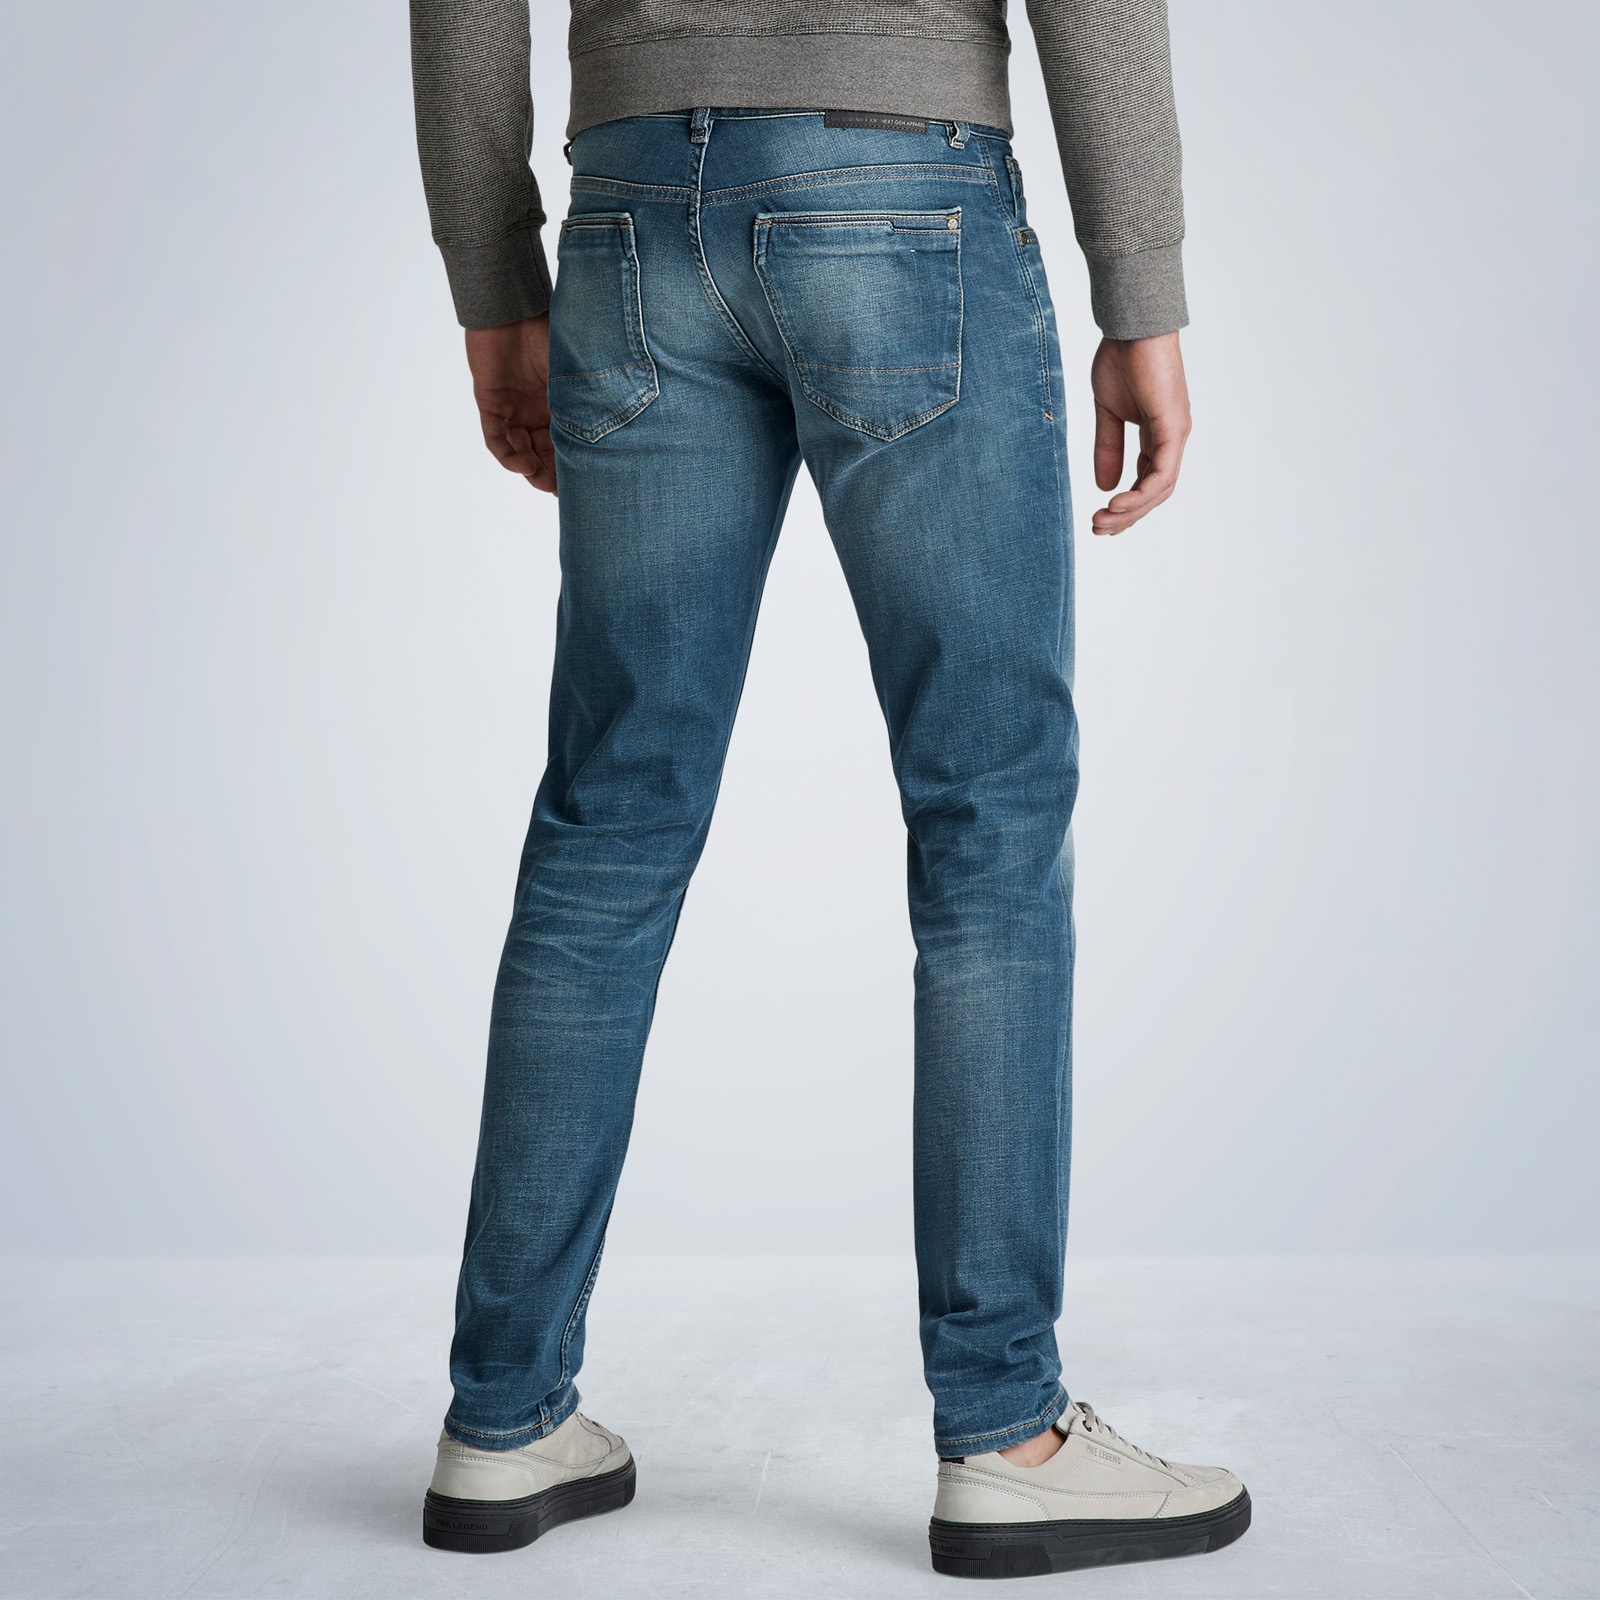 PME returns | Free shipping Denim LEGEND XV and | Jeans